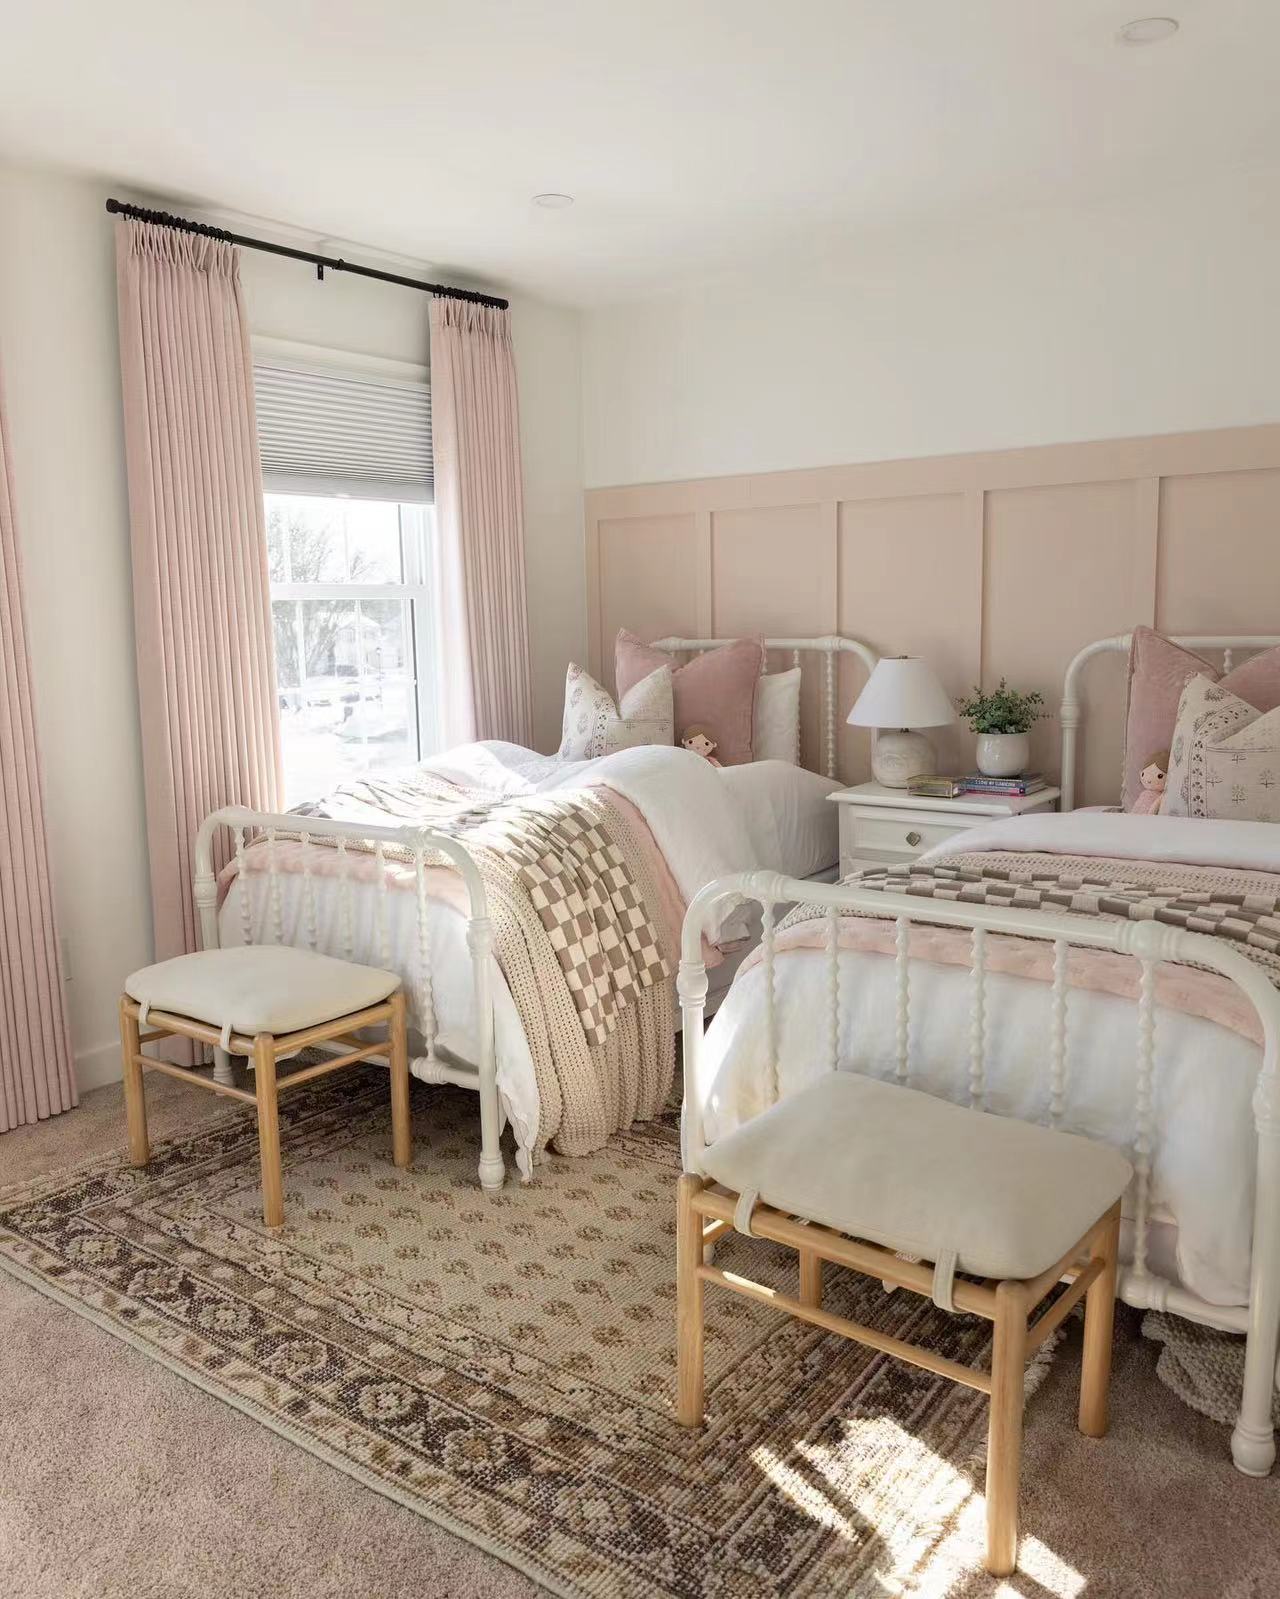 Elegant bedroom featuring EaseEaseCurtains pink pleated drapes, plush bedding with pink accents, and wooden stools on an ornate rug, showcasing influencer-approved style in a serene setting